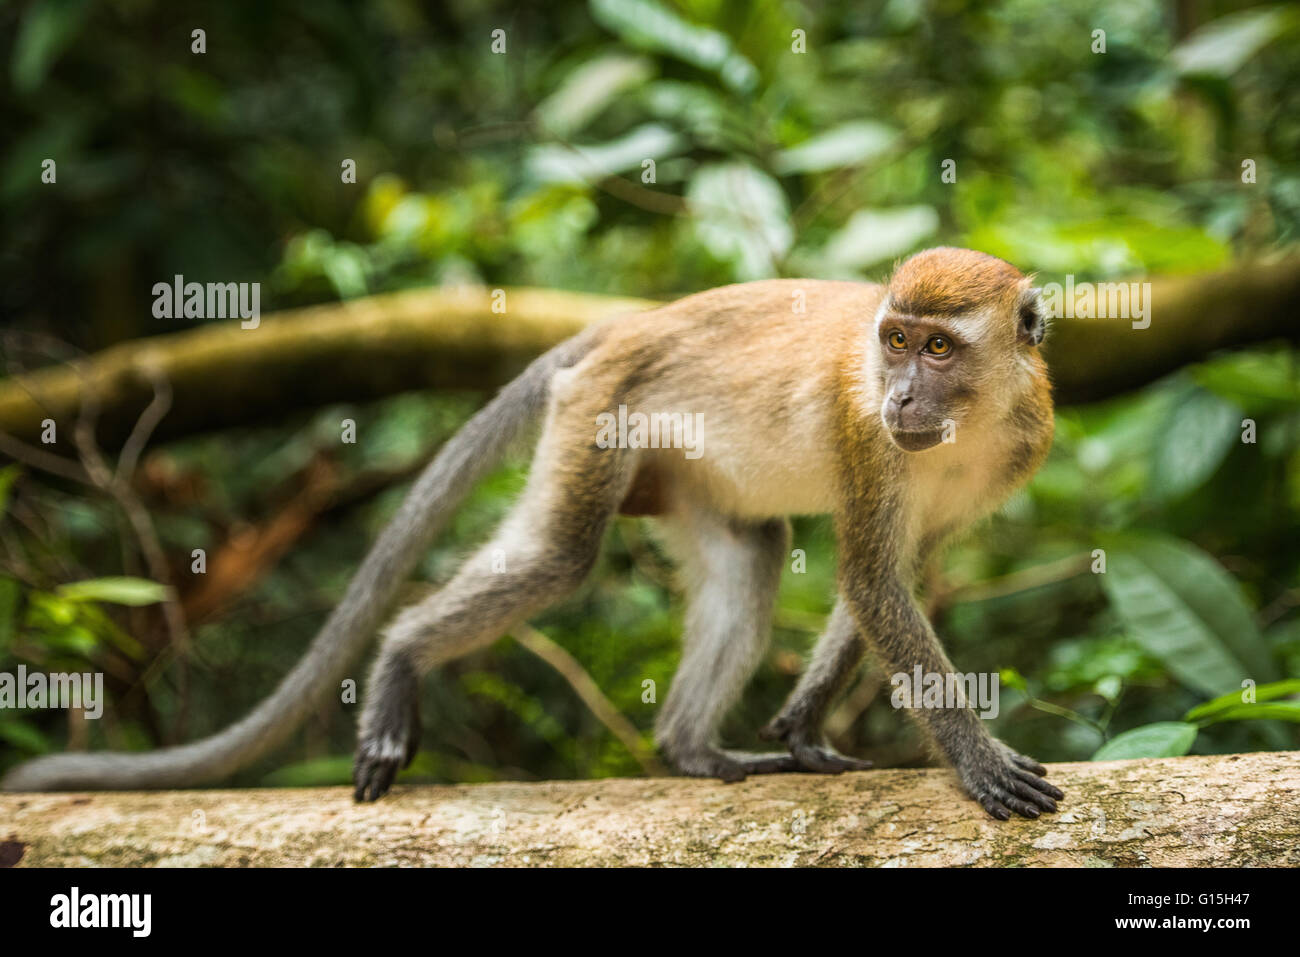 Long tailed Macaque (Macaca fascicularis), Indonesia, Southeast Asia Stock Photo